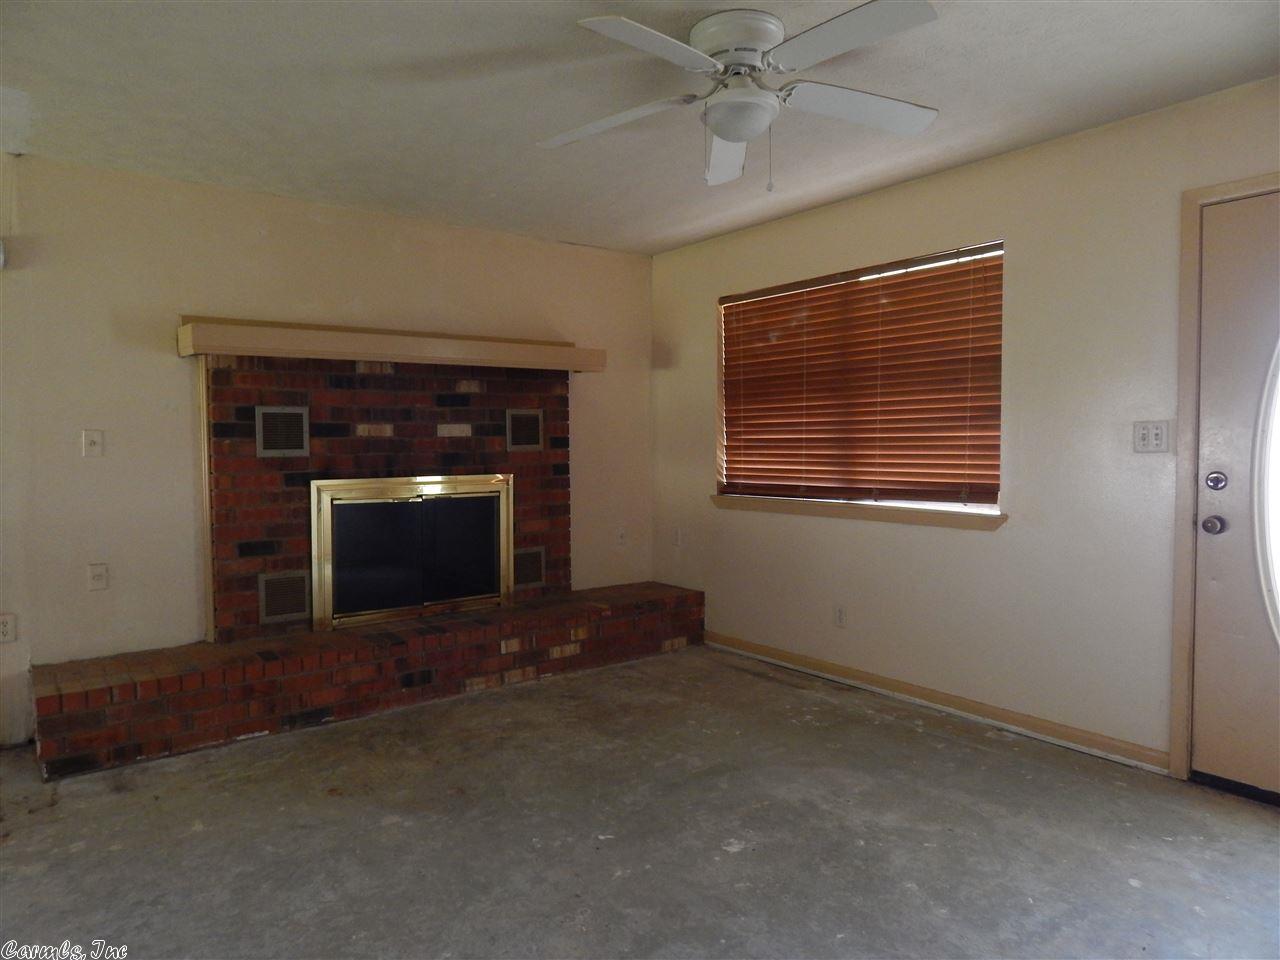 flipping_business_flip_house_before_picture_southern_arkansas_fireplace.jpeg